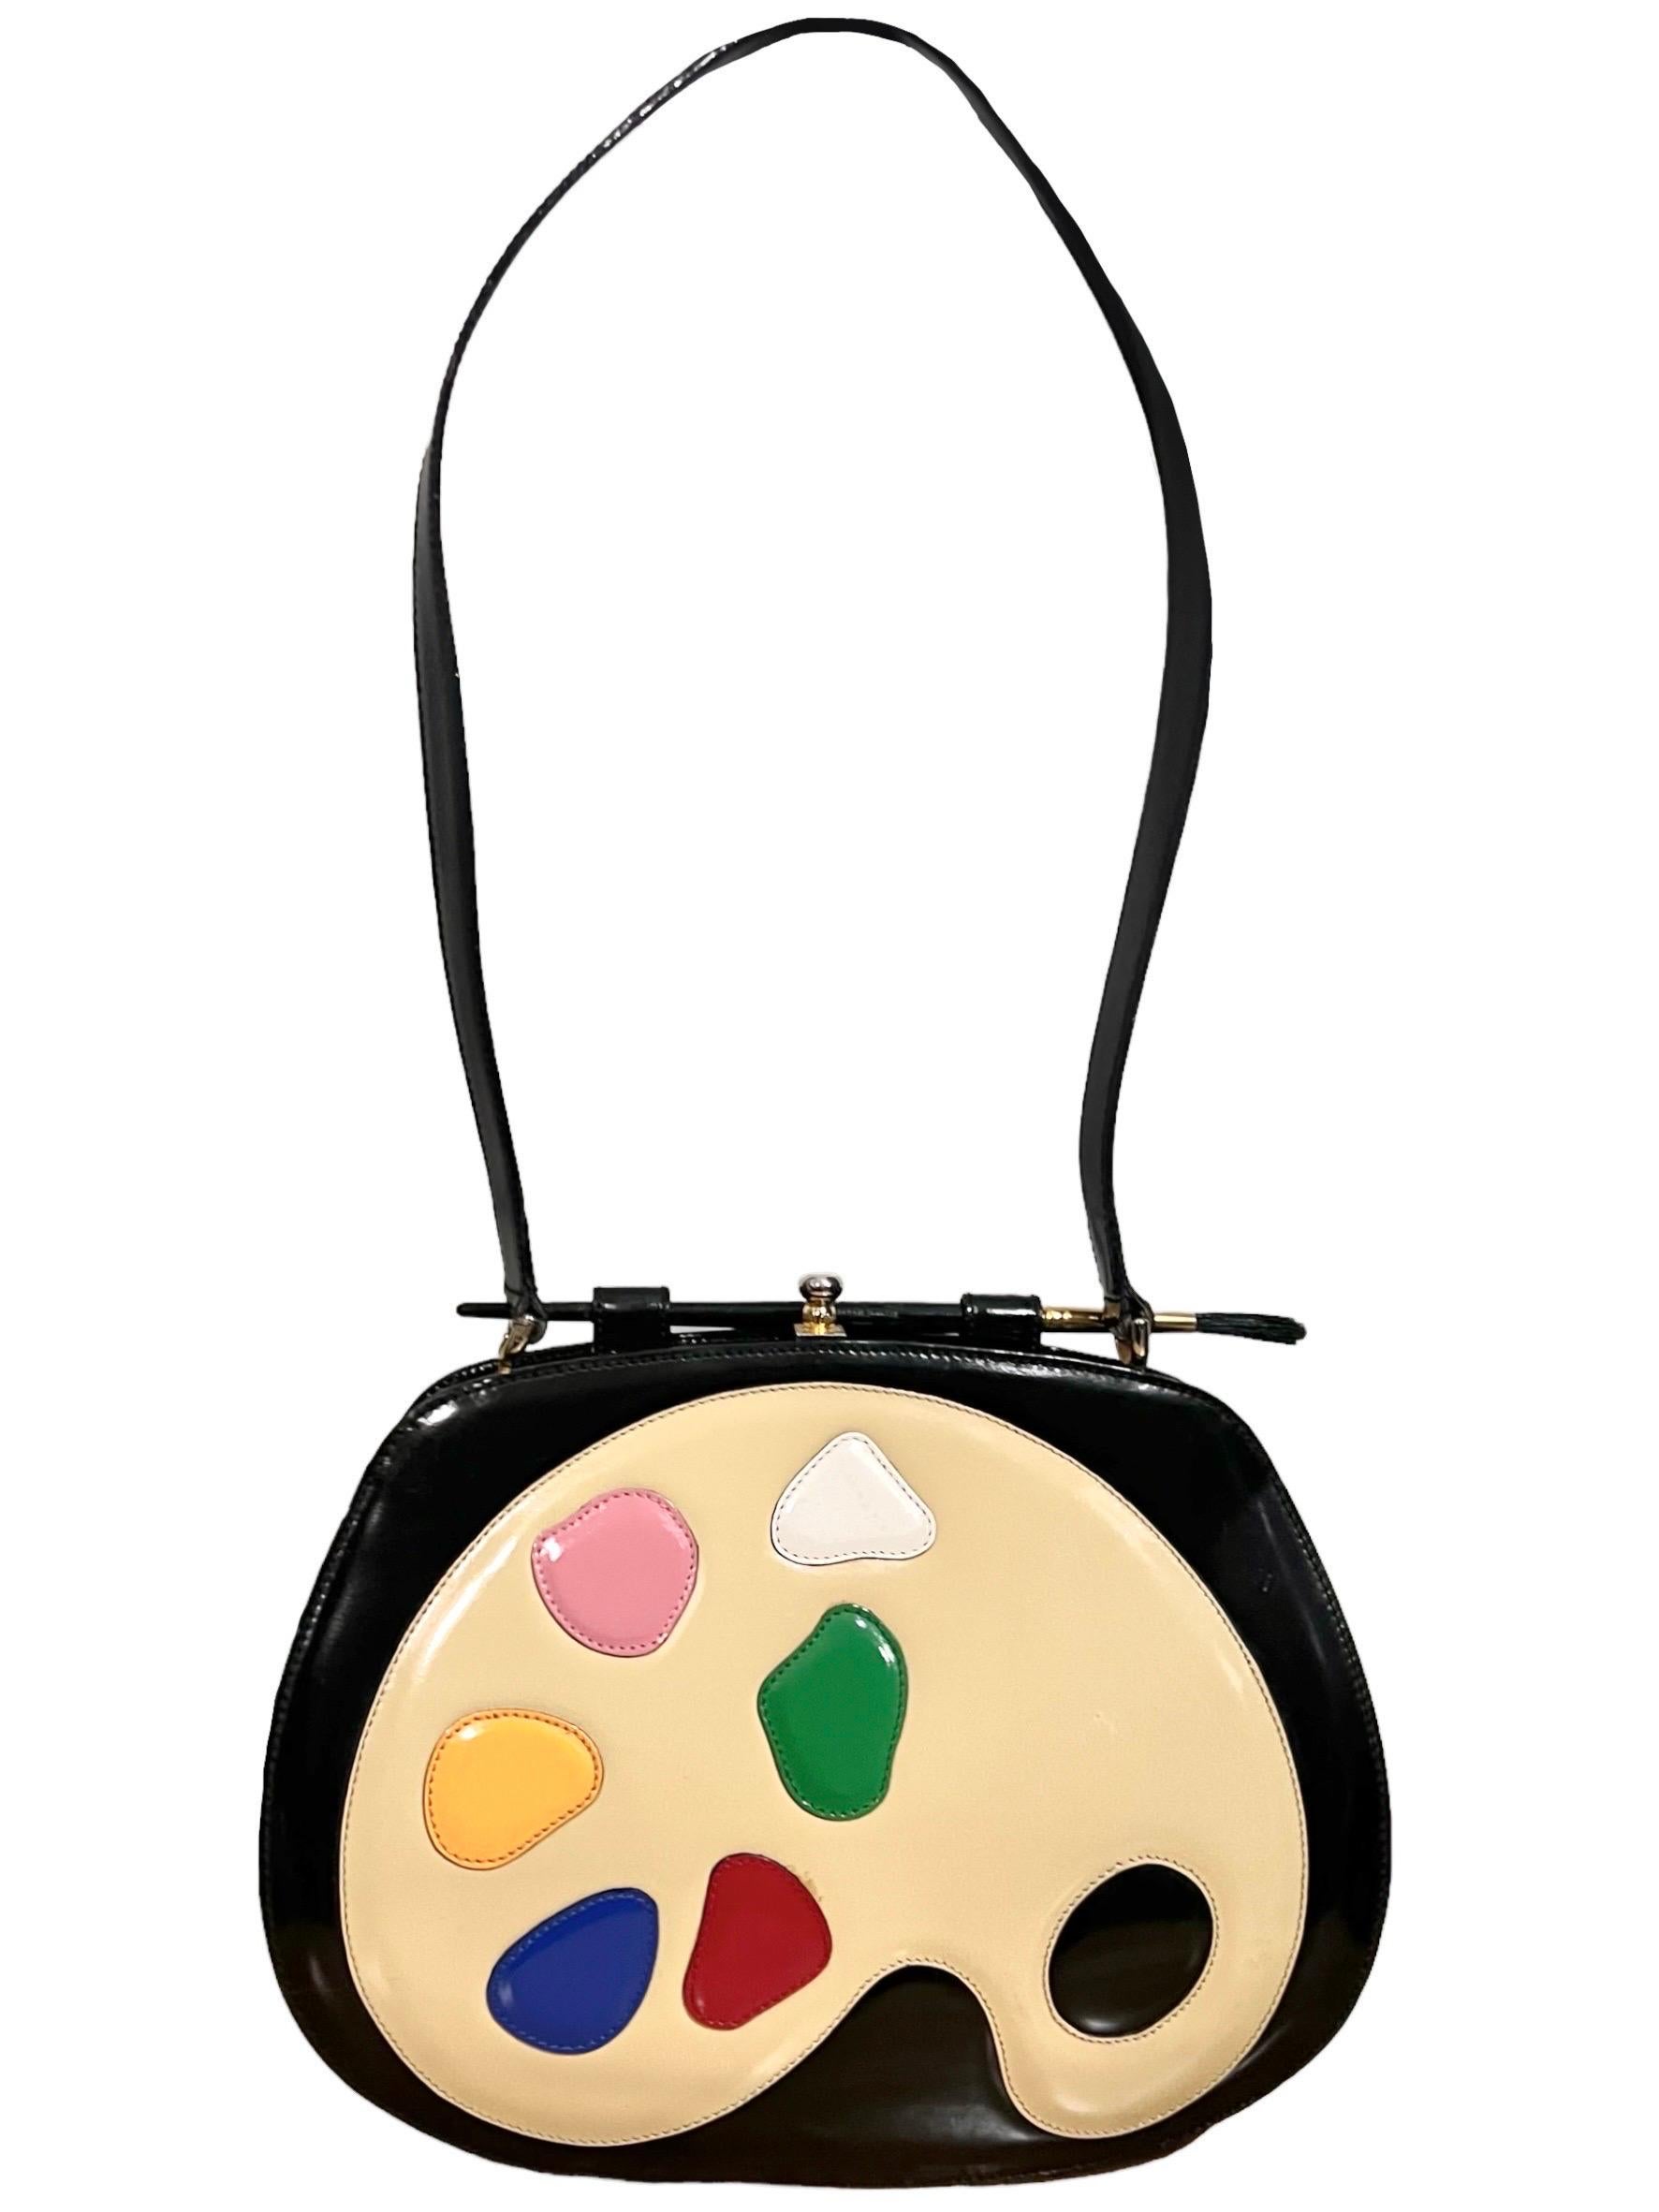 Vintage Moschino Redwall artist palette patent leather shoulder bag
Designed as an artists palette complete with a real paintbrush adorning the top of the bag.
Made of shiny patent leather.
Interior lined with jacquard fabric with one zipper pocket